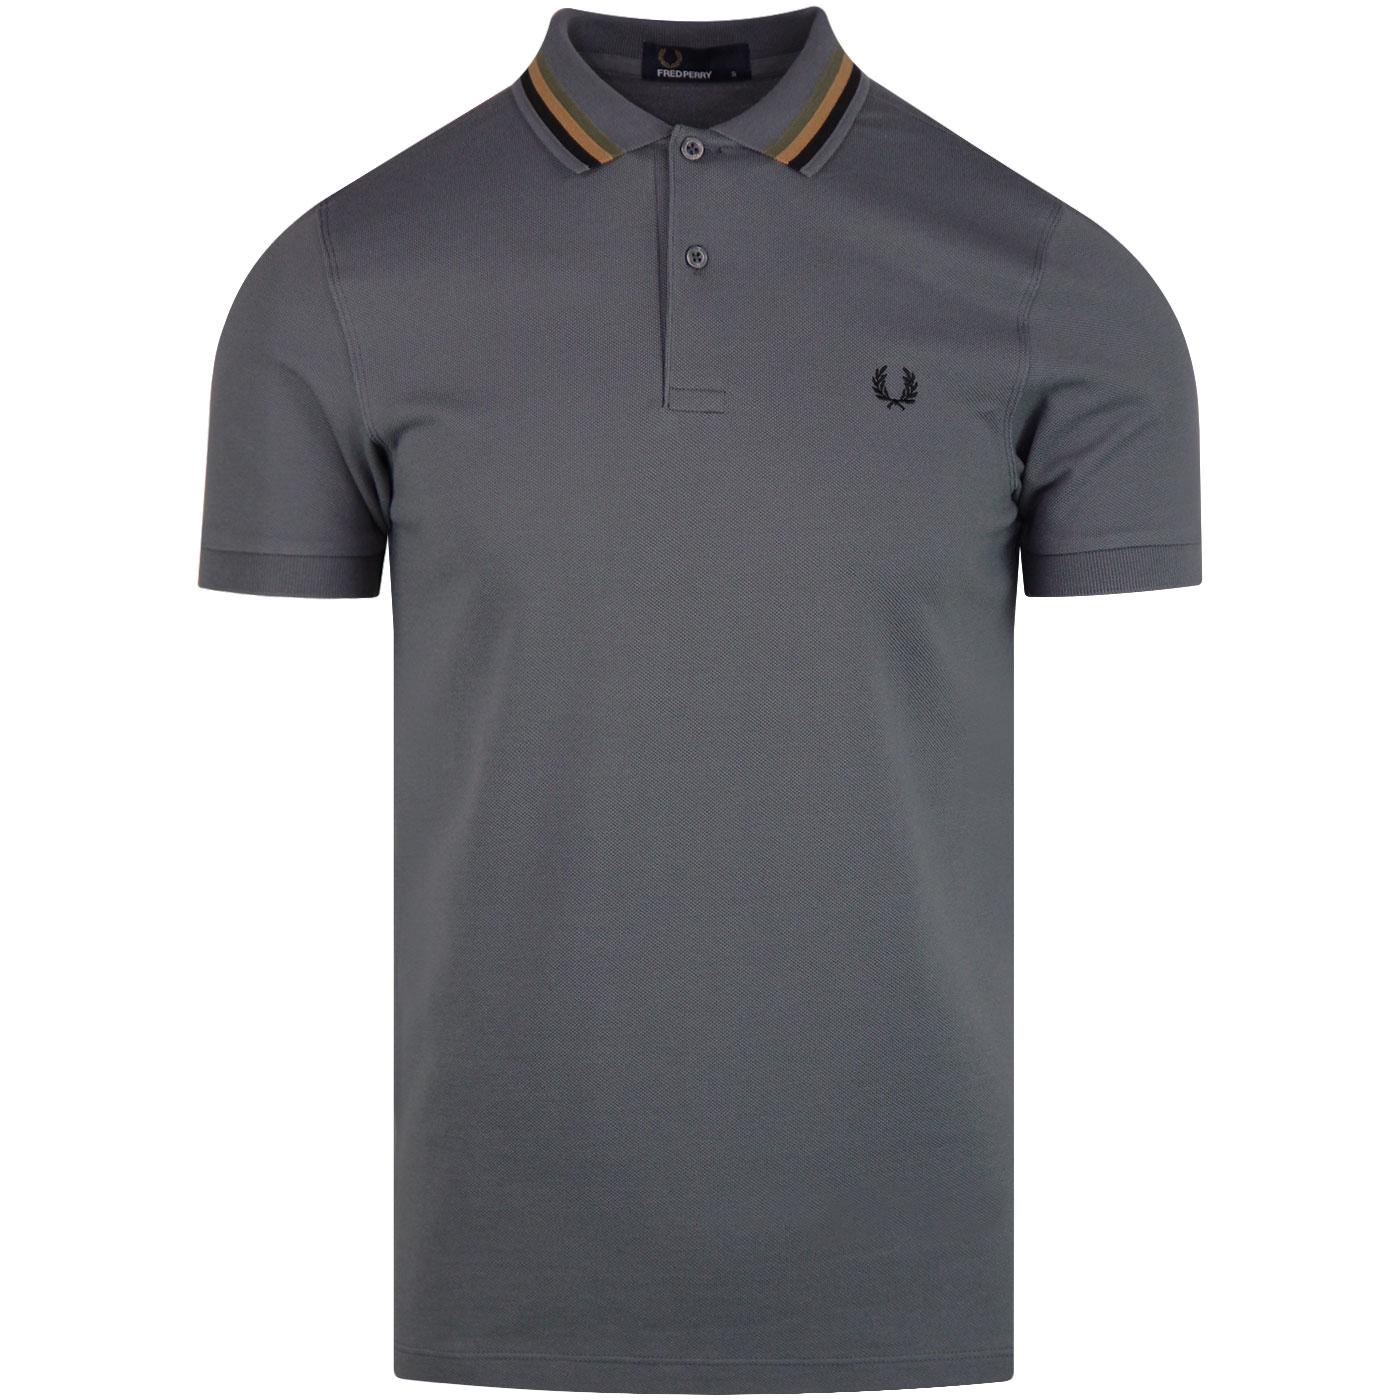 Bomber Stripe FRED PERRY Pique Mod Polo Shirt LEAD